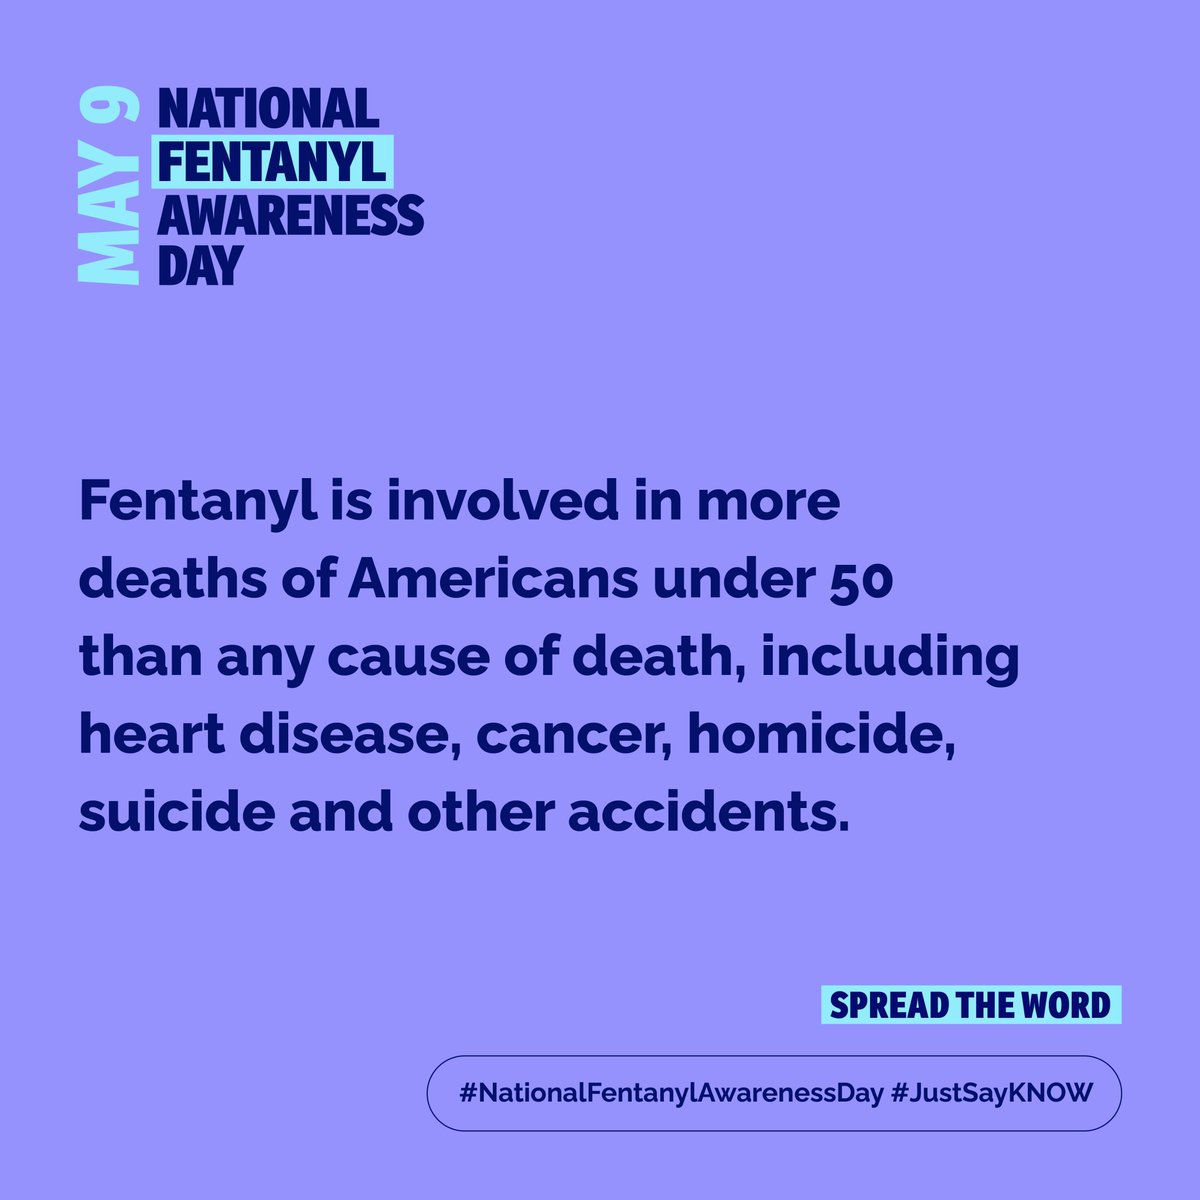 Be sure to test your product for fentanyl, carry naloxone and know the signs of an overdose. Many cities and states are making naloxone and test strips available to prevent fentanyl poisoning. Learn more at fentanylawarenessday.org ❤️#NationalFentanylAwarenessDay #JustSayKNOW